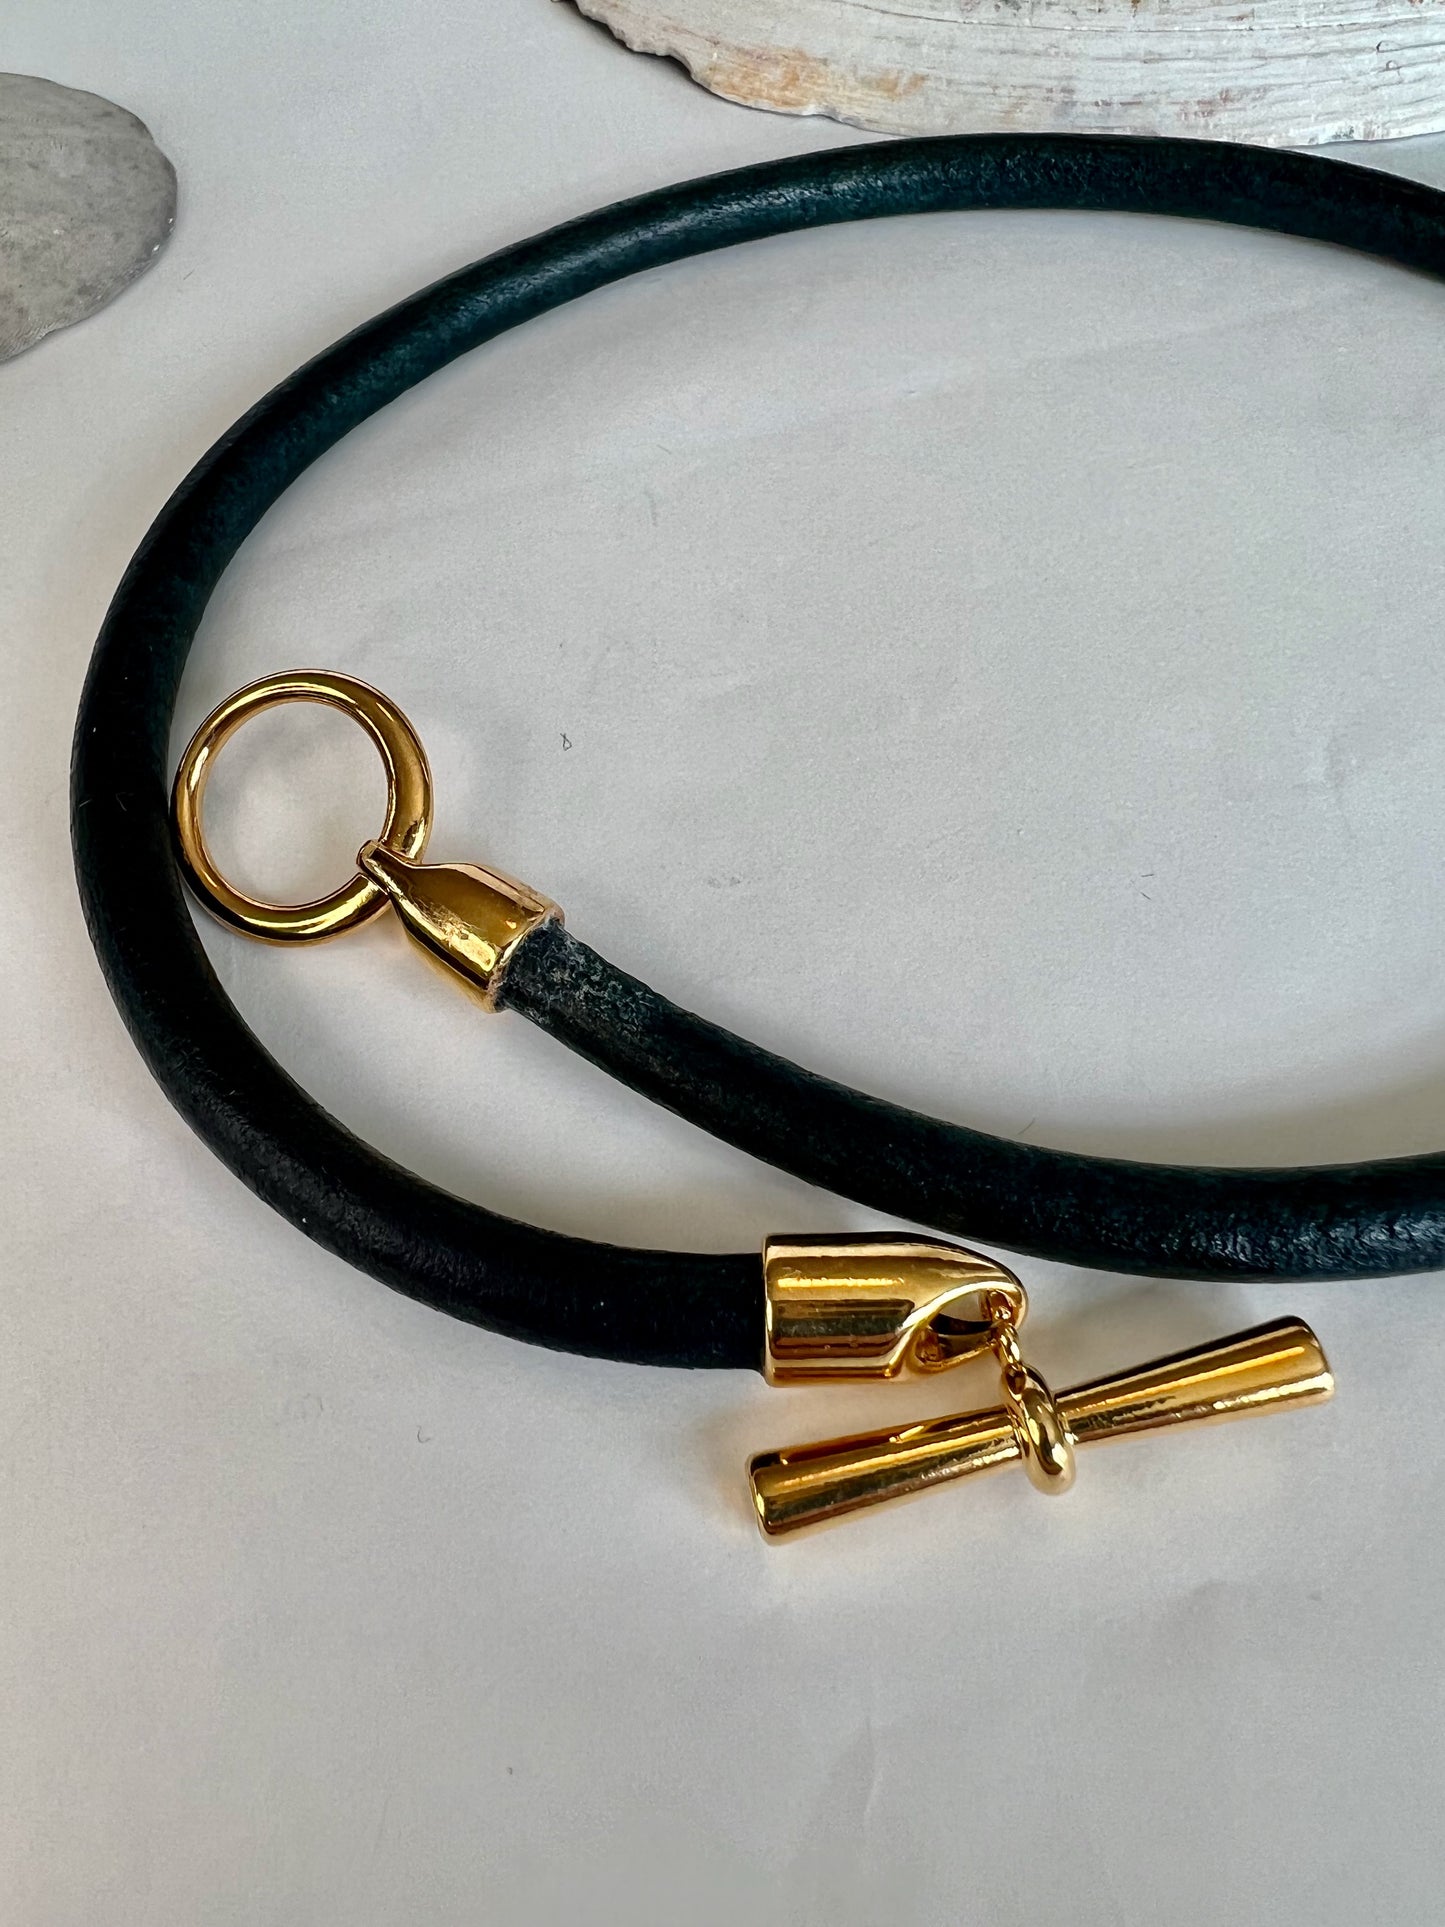 Leather Necklace  Dark distressed denim blue leather necklace with gold toggle clasp as center focus. 16" long.